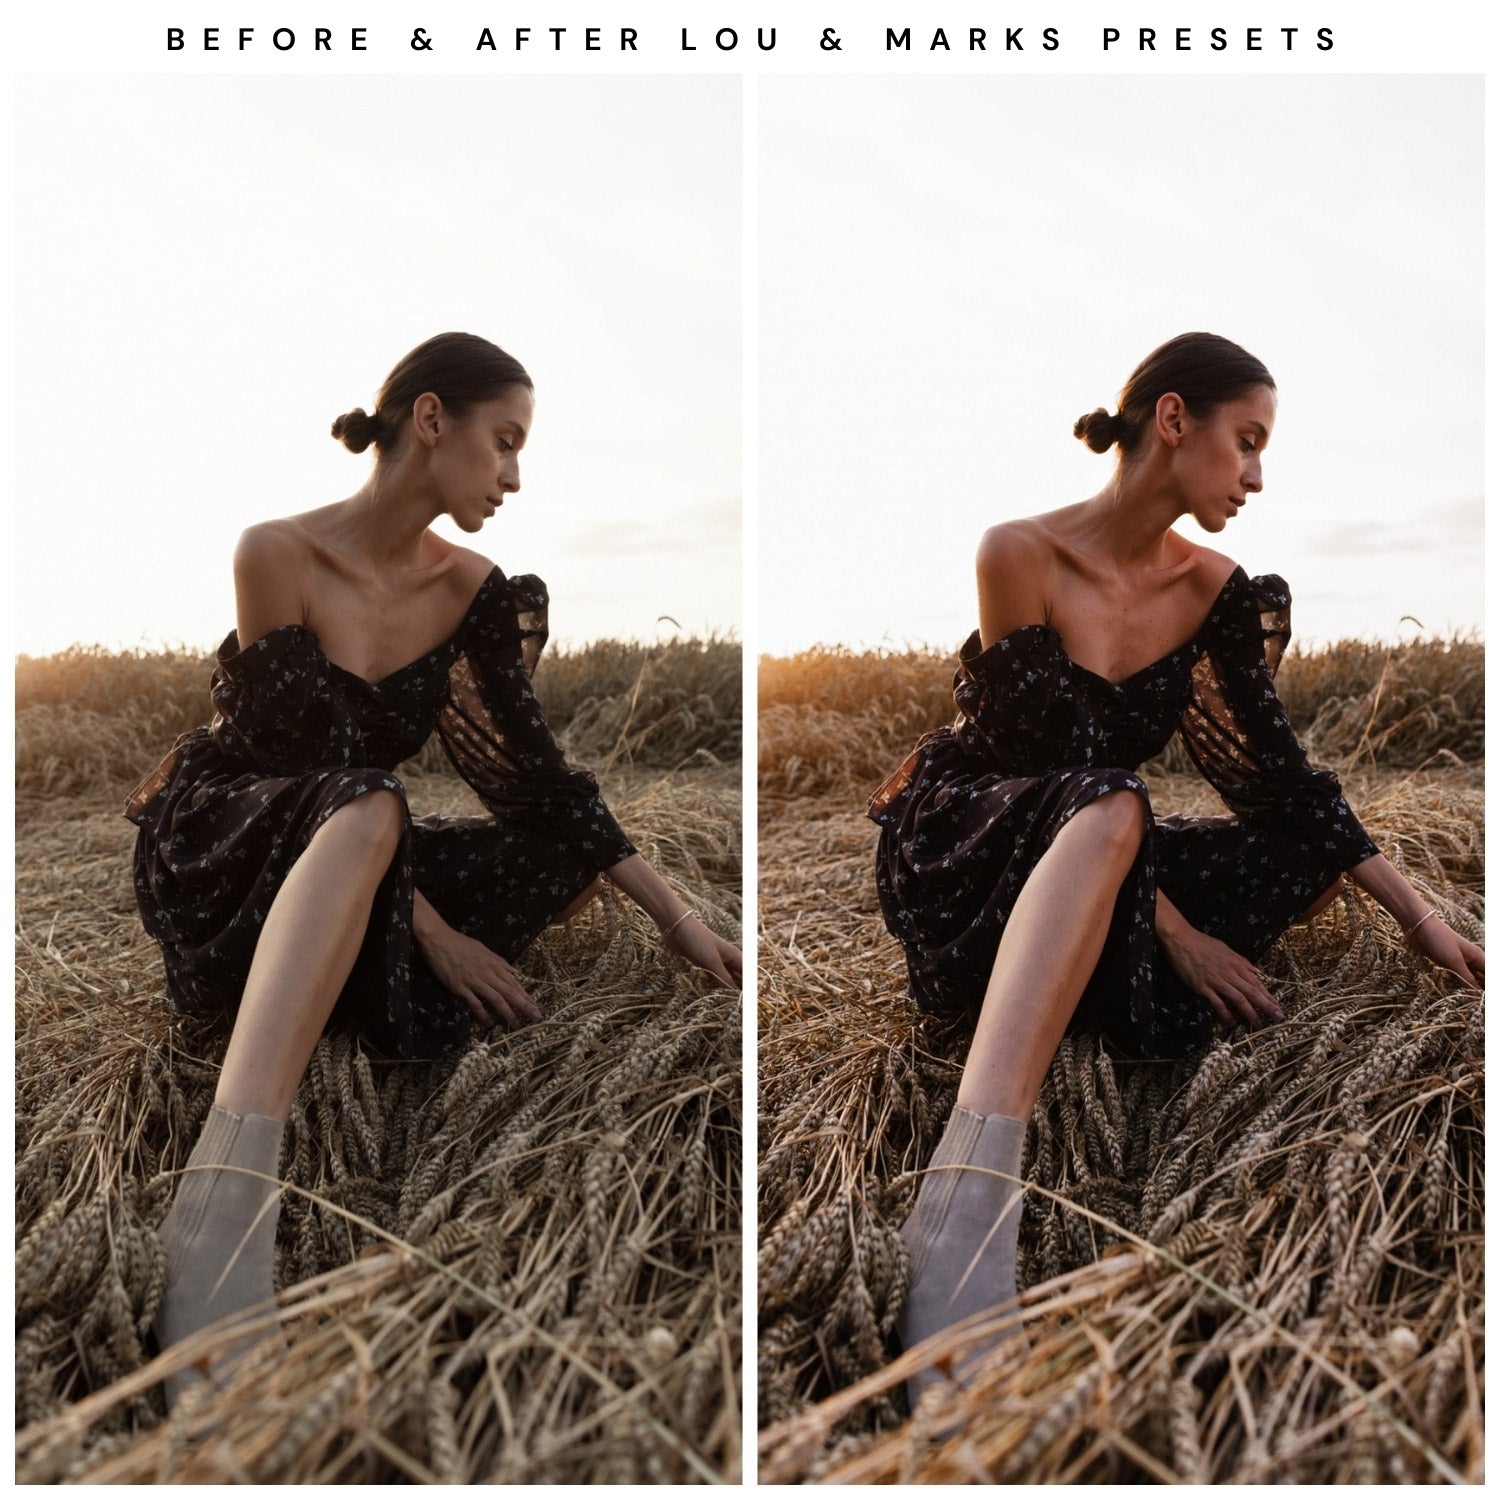 Lou And Marks Presets Moody Lightroom Presets Bundle The Best Moody Presets Portraits